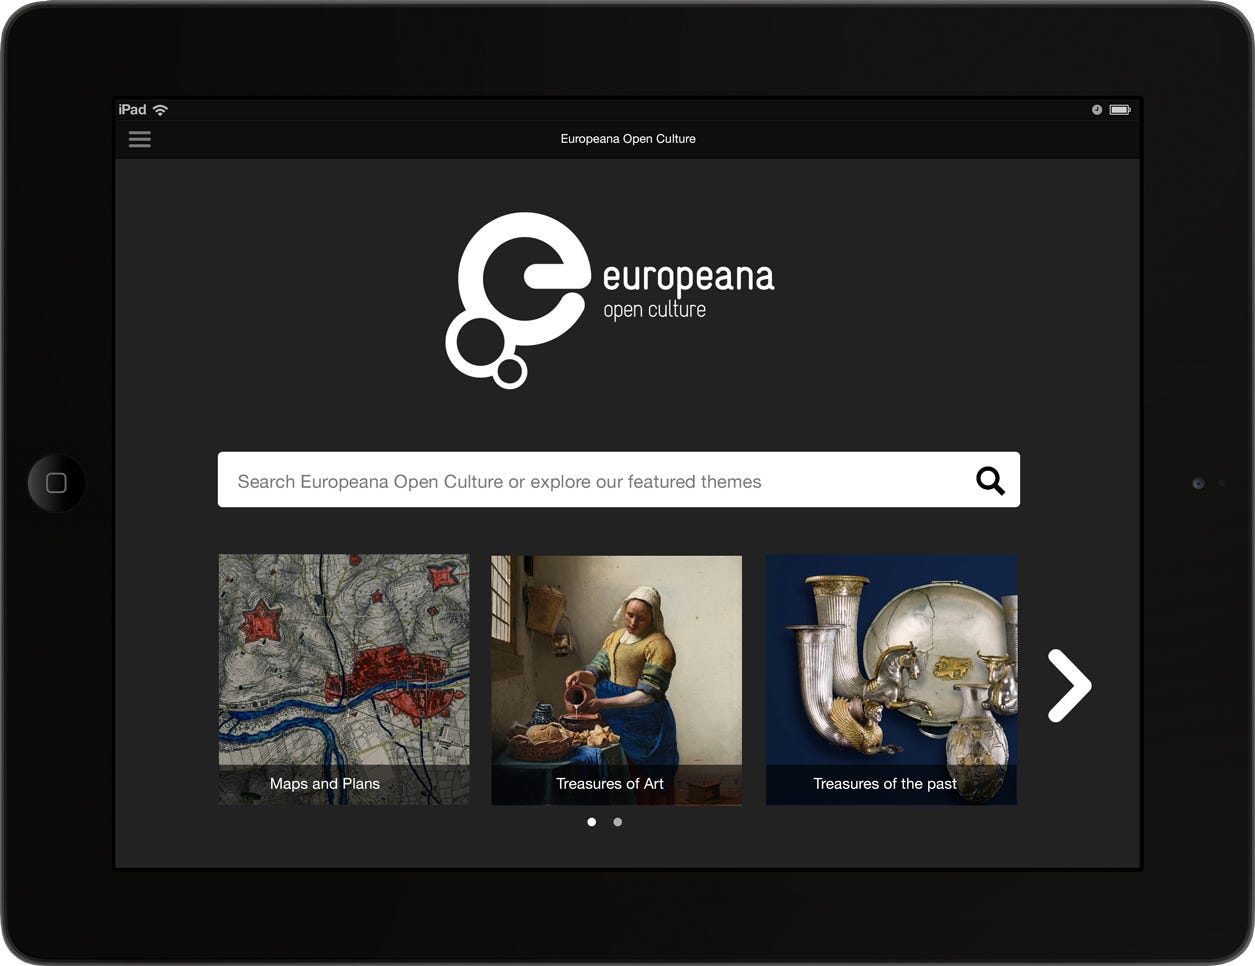 The landing page of the Europeana Open Culture app.